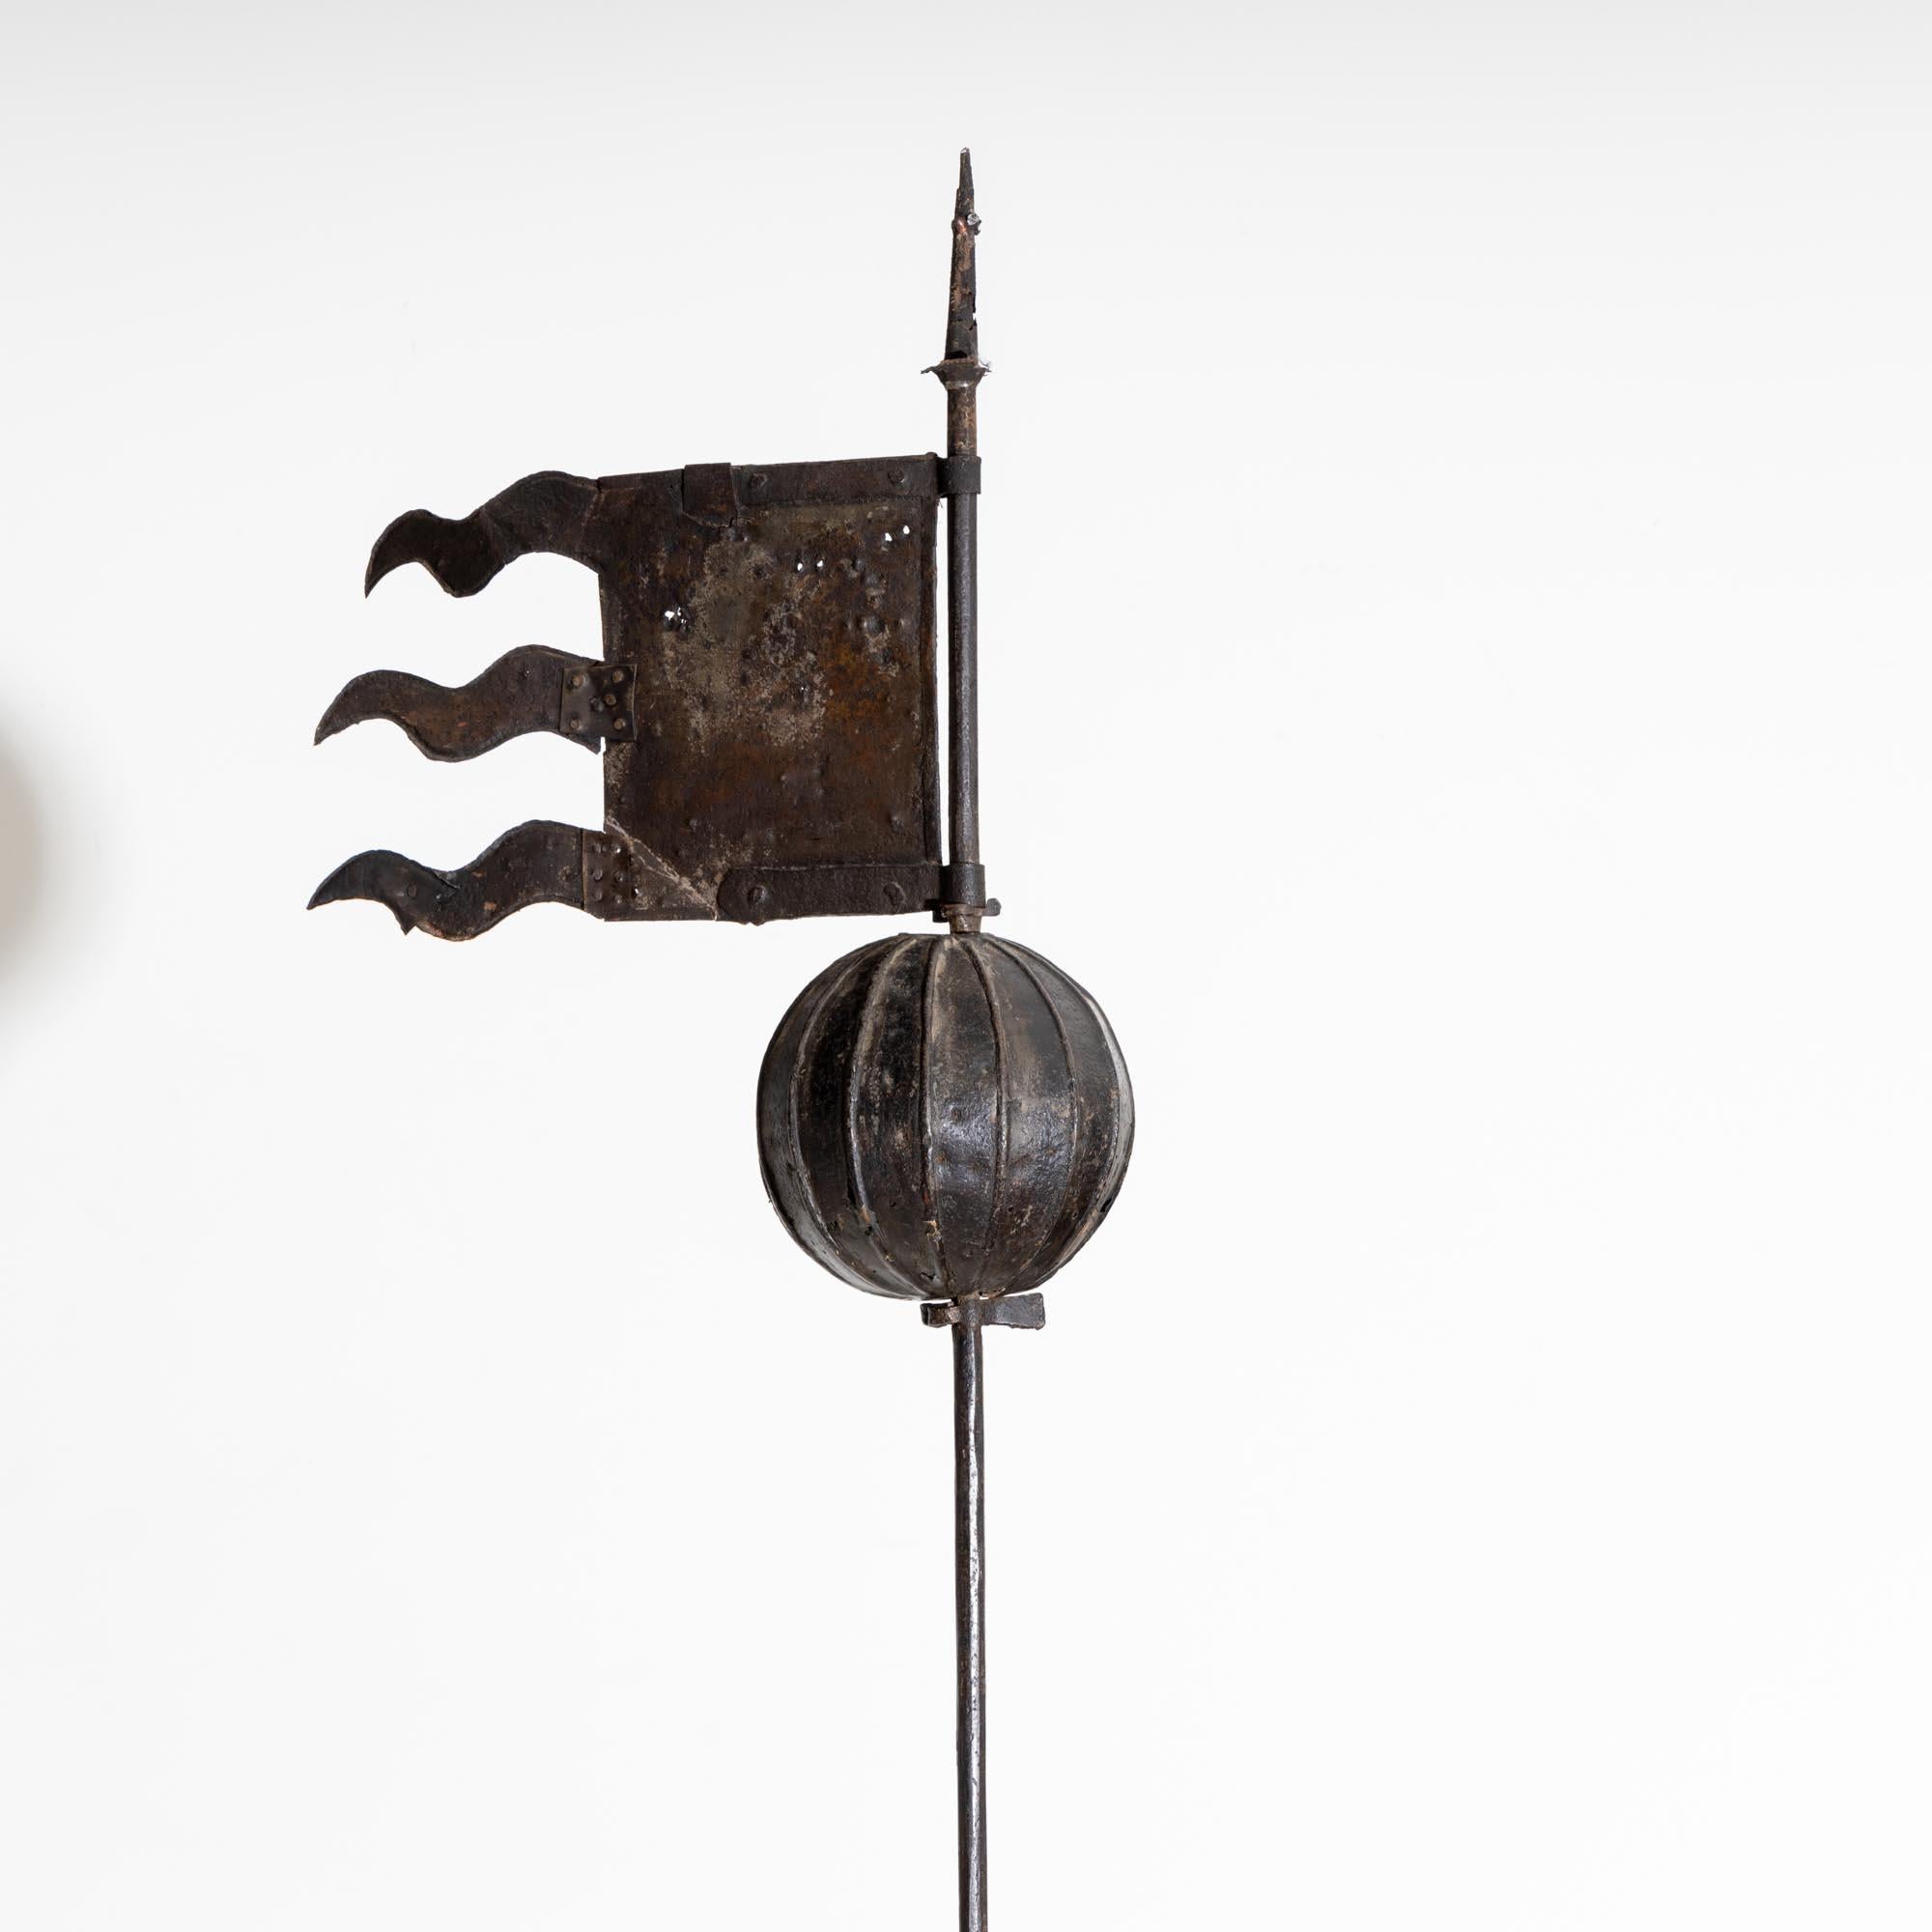 Large iron weathervane from the 17th Century with long flagpole and hand-hewn sandstone block as a stand.